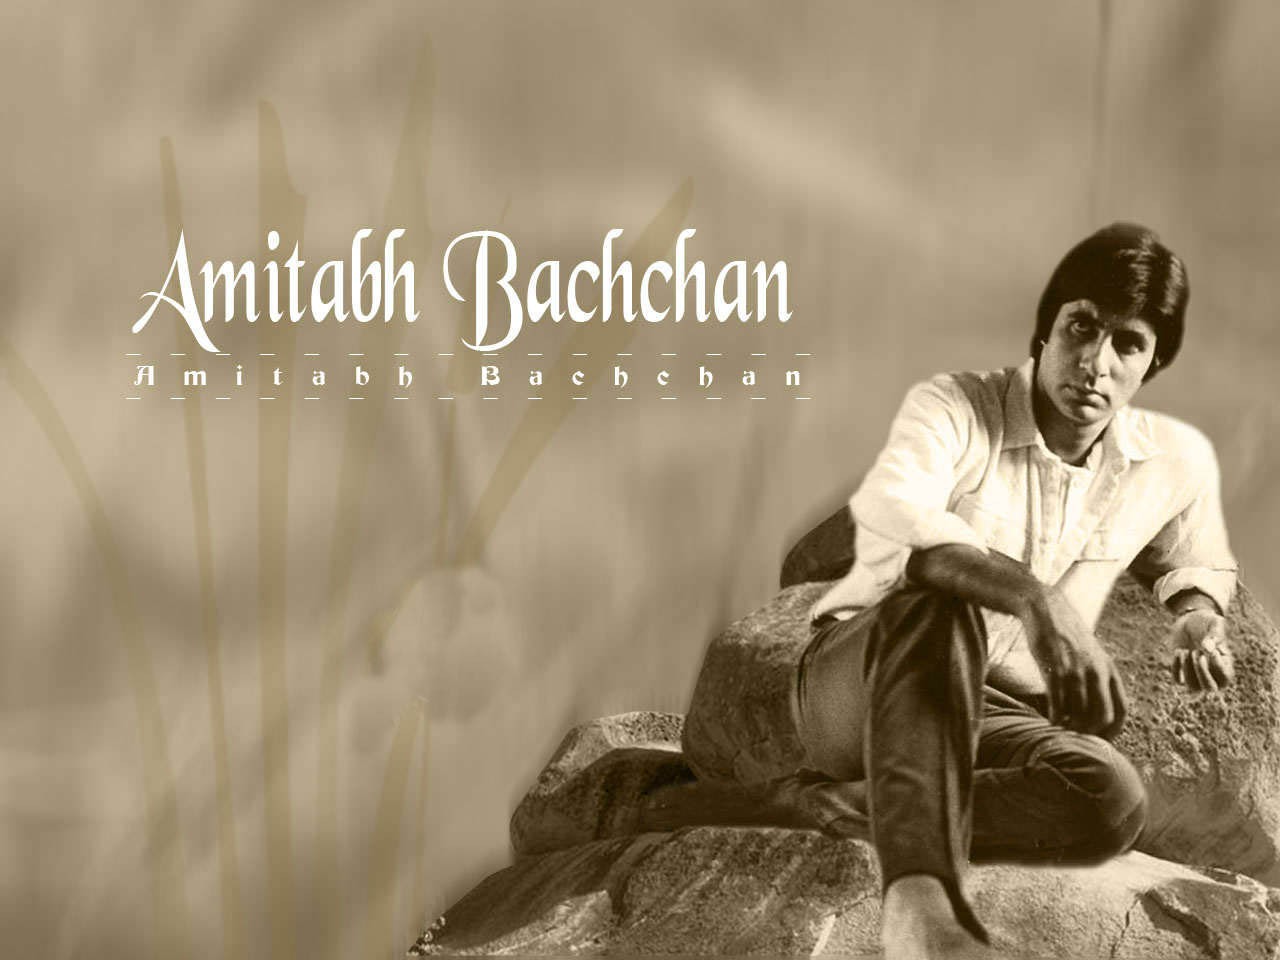 Wallpaper Free - Amitabh Bachchan Images Download Free , HD Wallpaper & Backgrounds